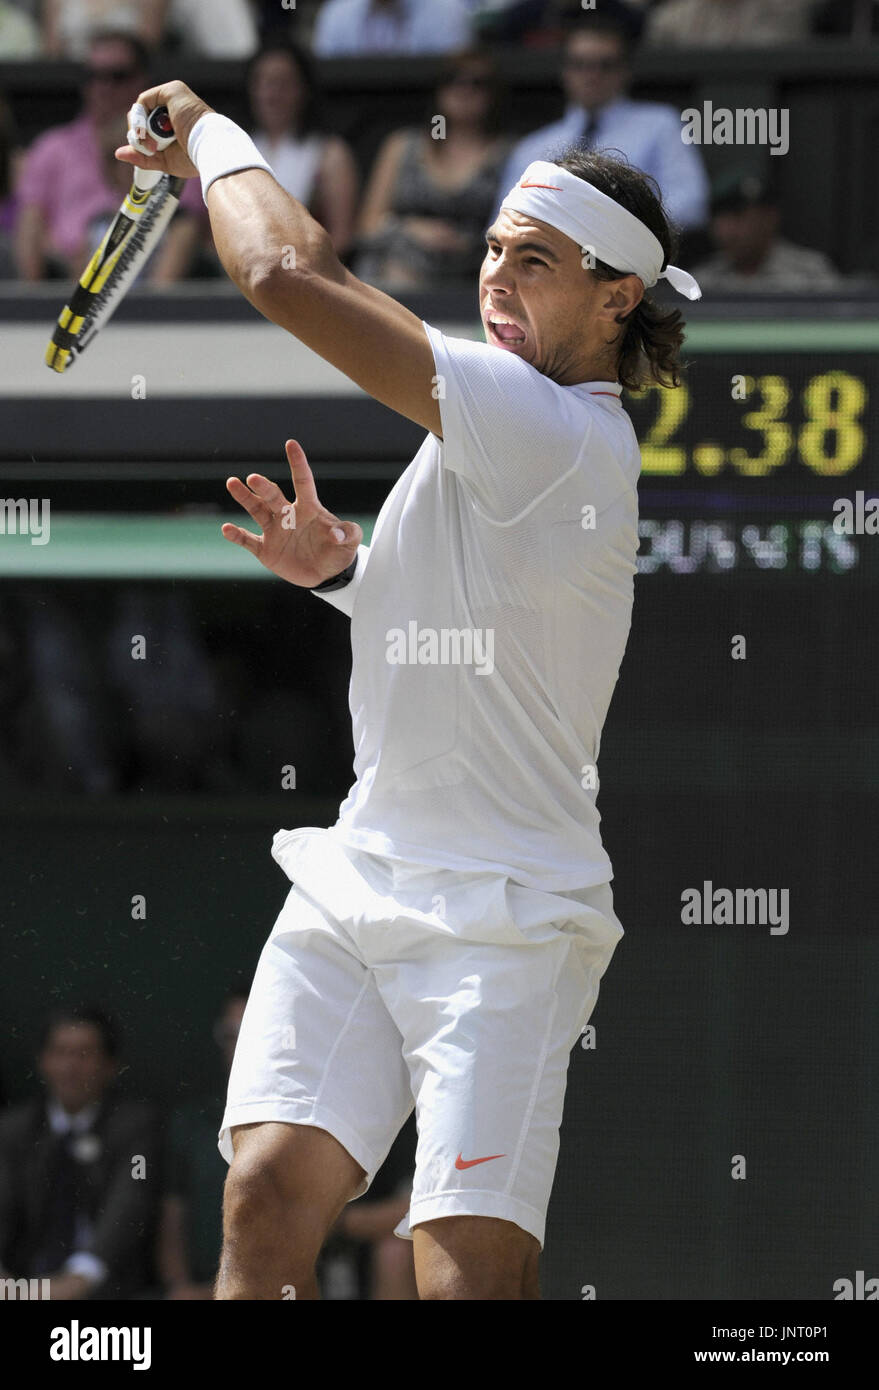 WIMBELDON, England - Rafael Nadal of Spain returns the ball to Tomas Berdych of the Czech Republic during the men's singles final at the Wimbledon tennis championships at the All England Tennis Club in London on July 4, 2010. Nadal won 6-3, 7-5, 6-4. (Kyodo) Stock Photo